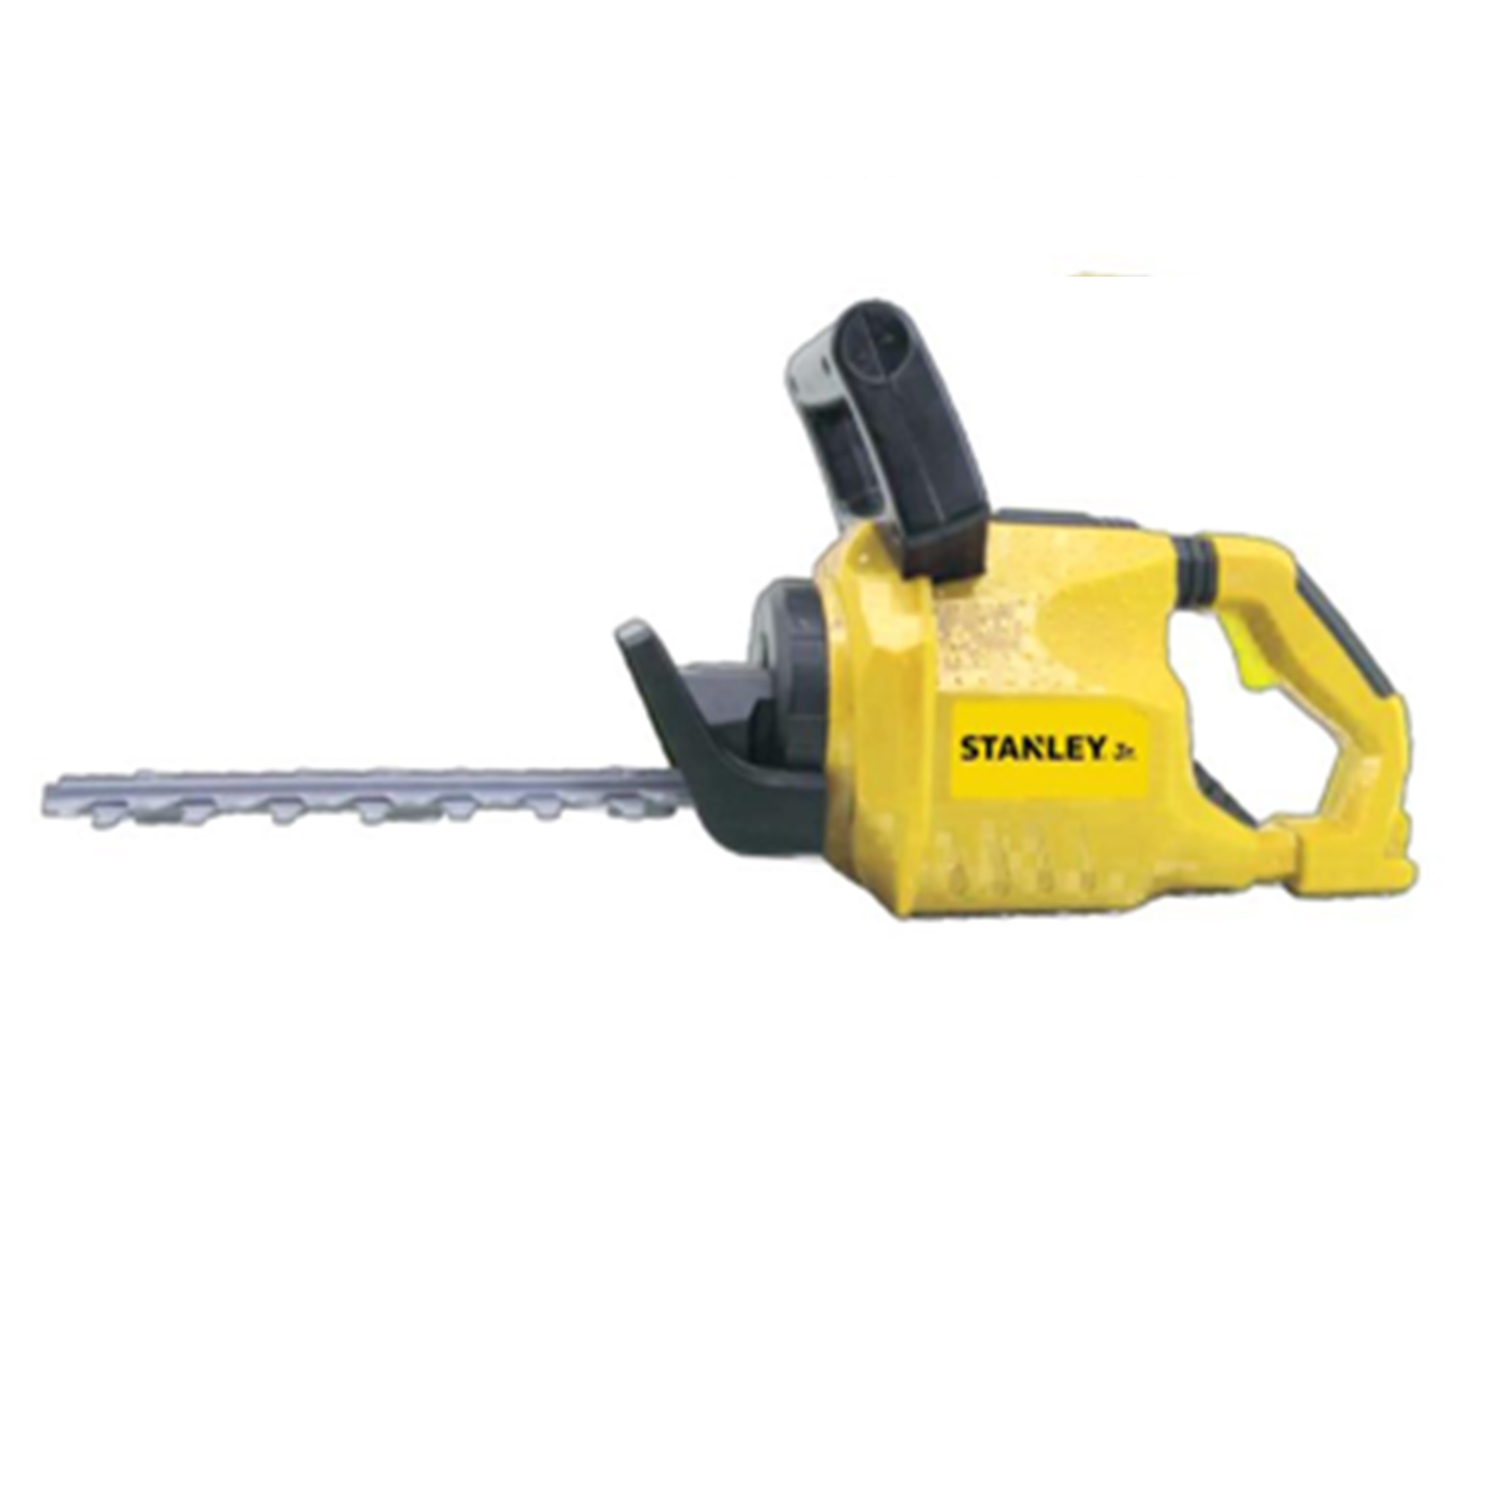 Photos - Other interior and decor Stanley Jr. Toy Hedge Trimmer Plastic Black/Yellow 1 pc RP009-SY 